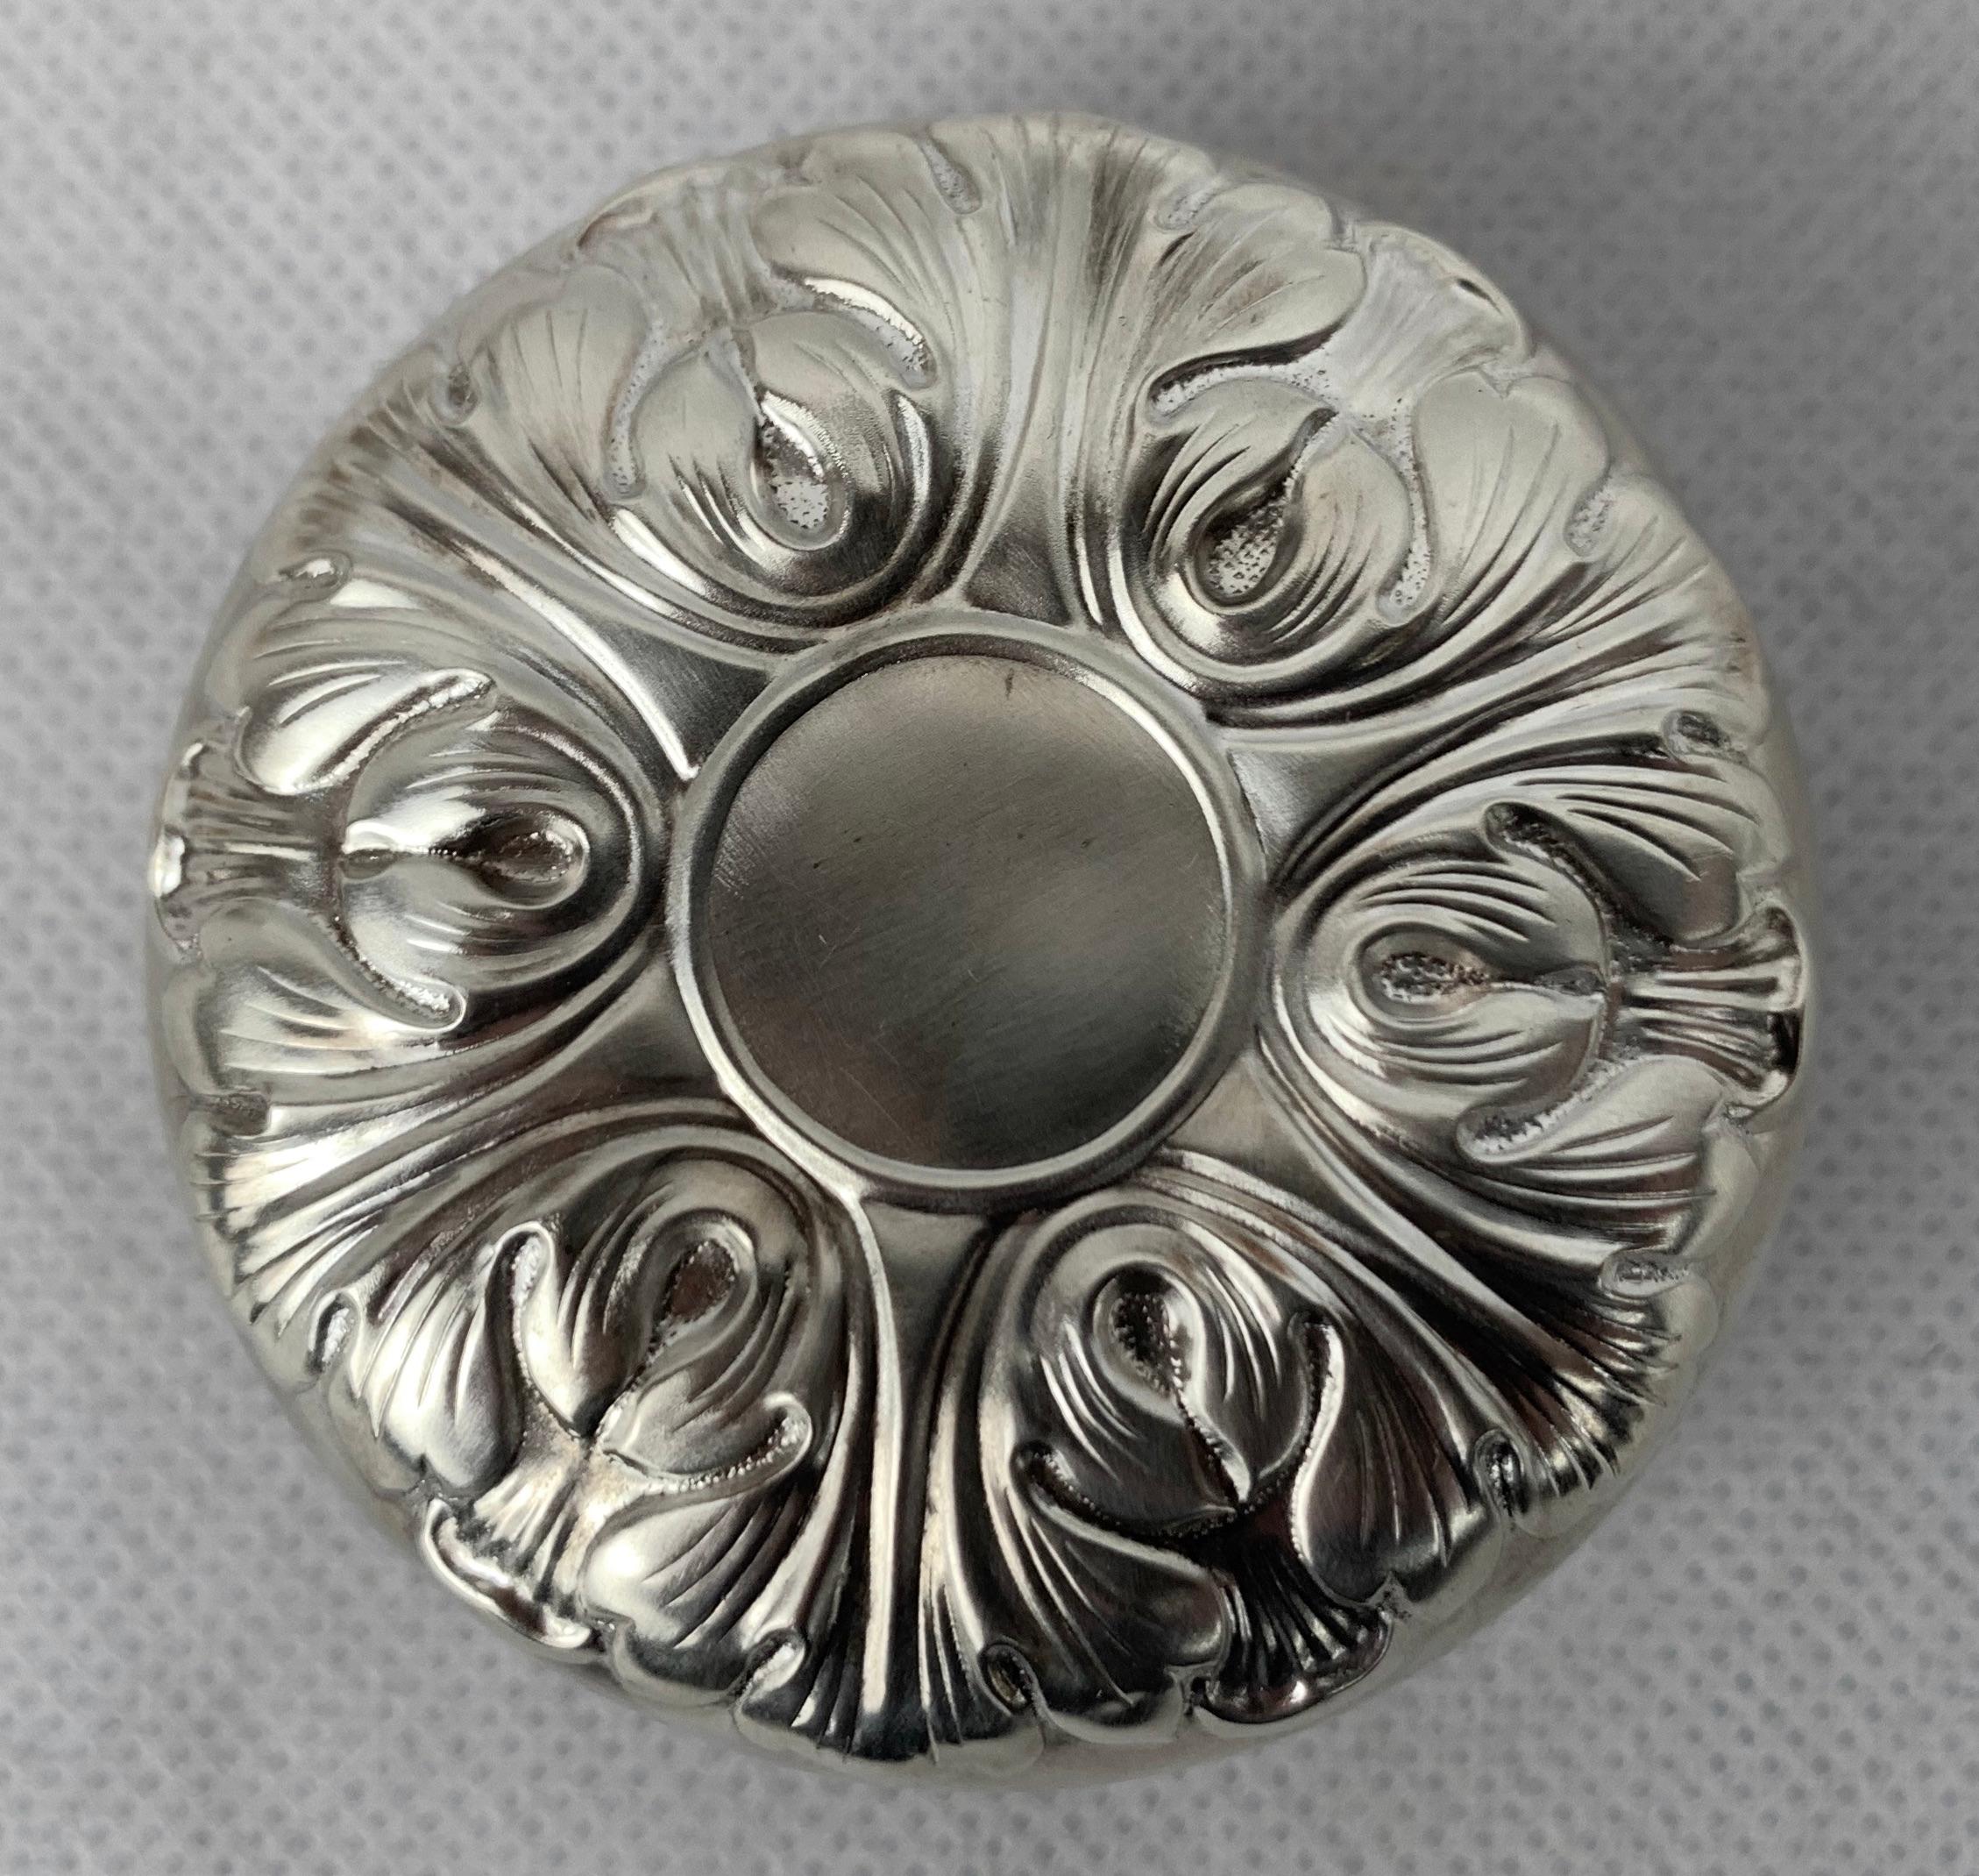 An executive vintage toy in sterling silver repoussé by the Gorham Manufacturing Company of Providence Rhode Island. The design is of acanthus leaves which is a nod to neoclassicism. These were made between the 1950's and 1970's.
The sterling silver